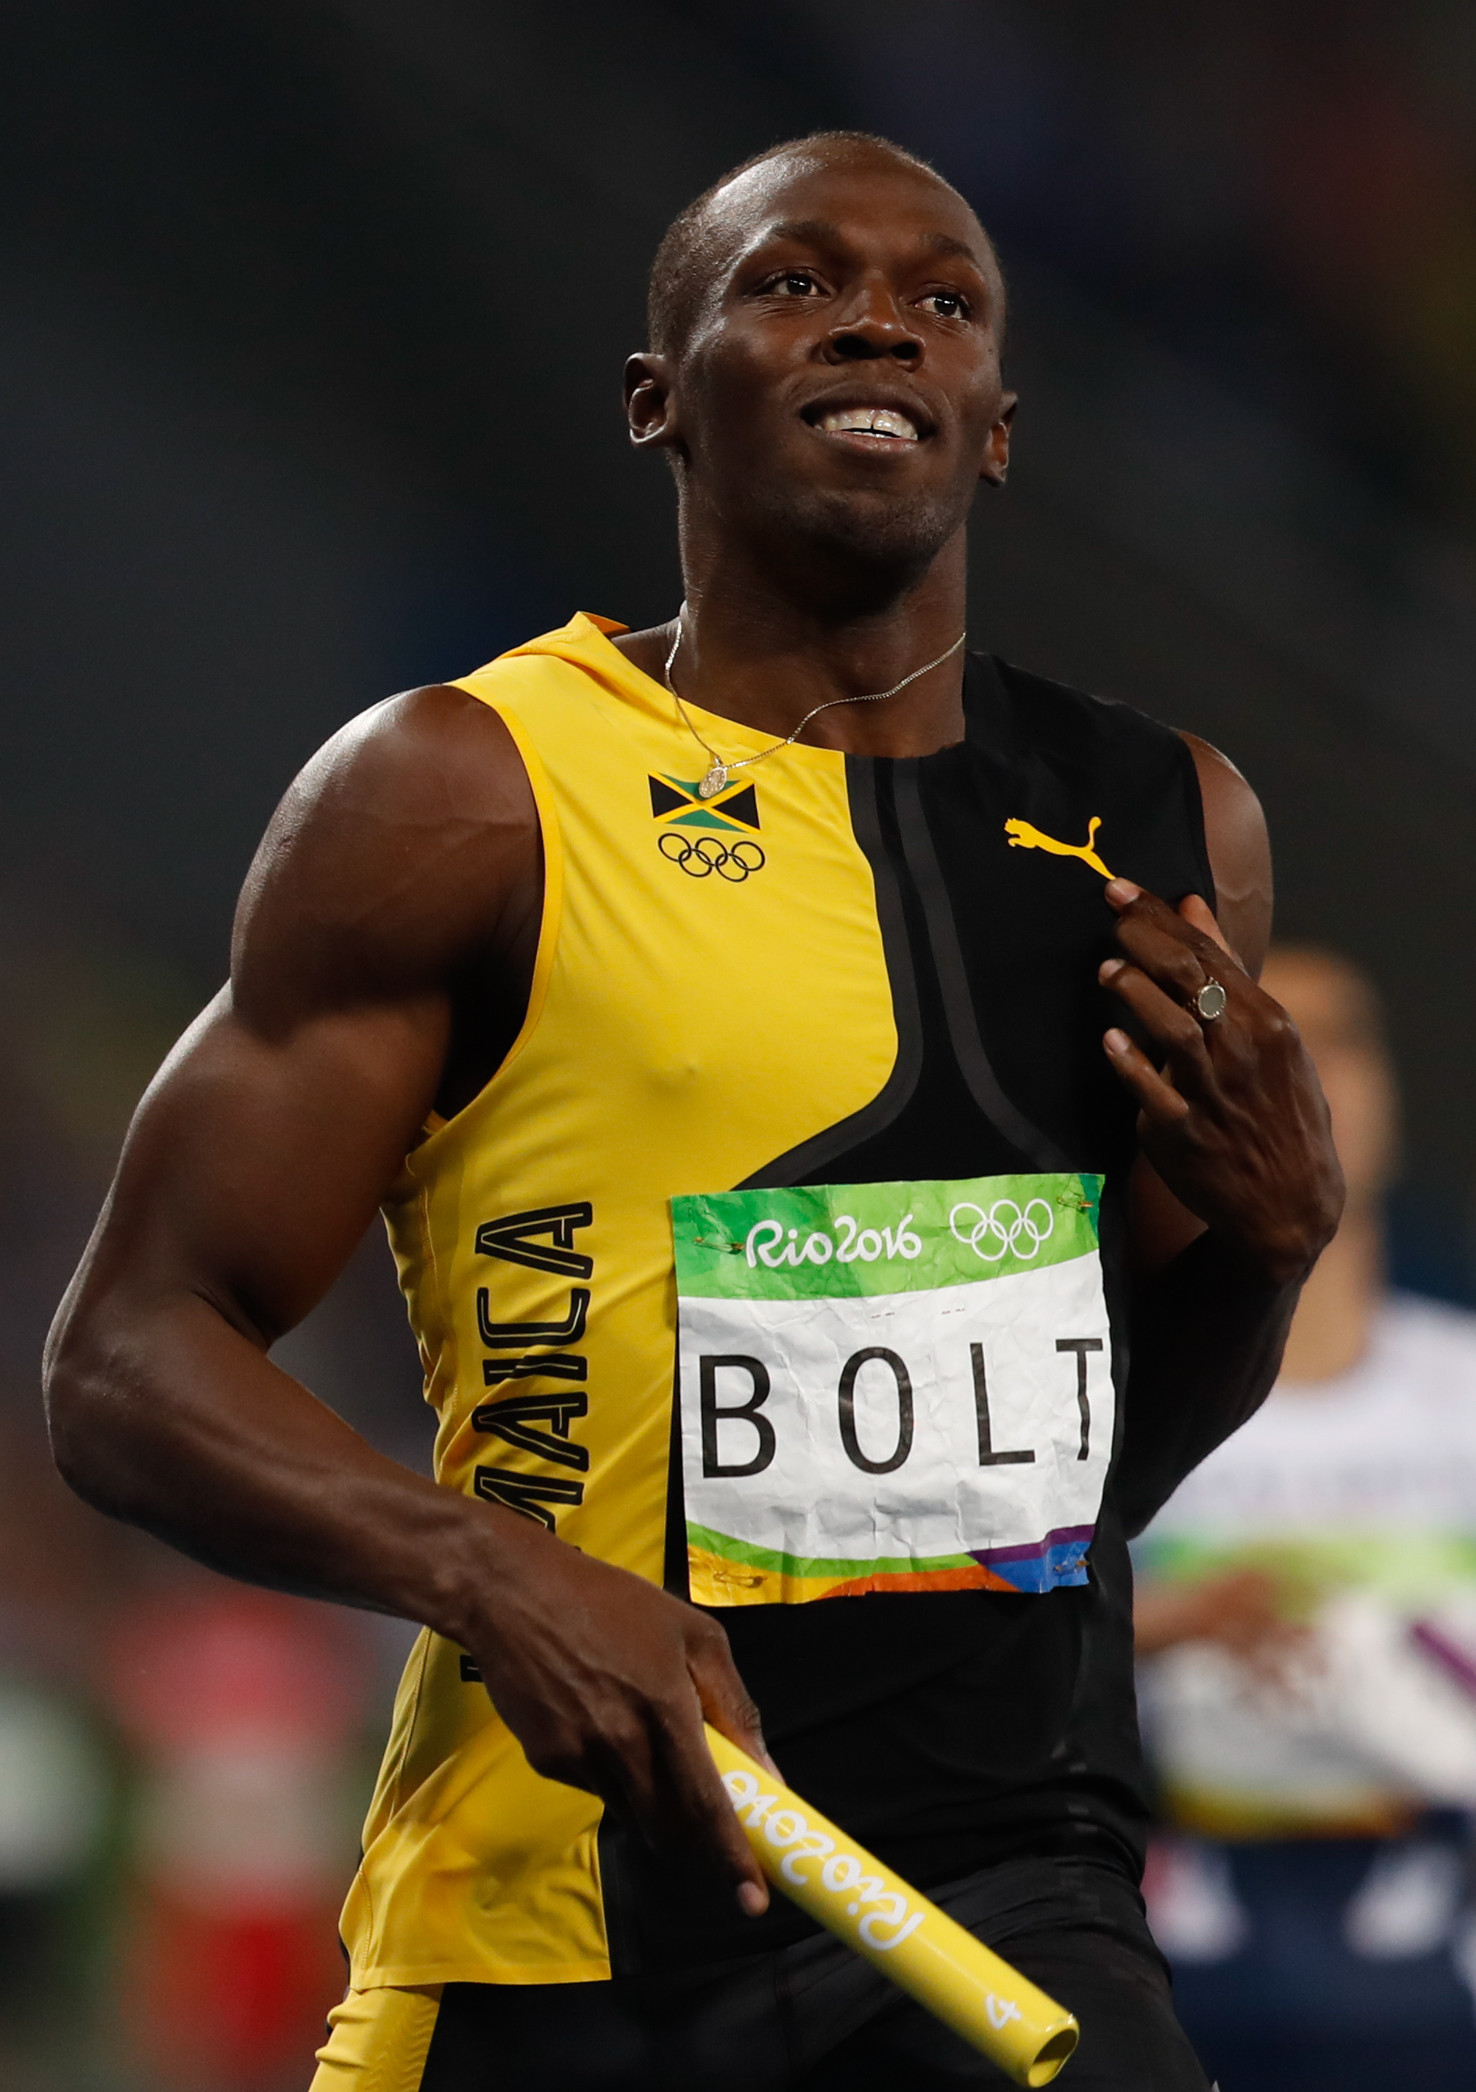 Who presented Usain Bolt with his first Olympic gold medal?